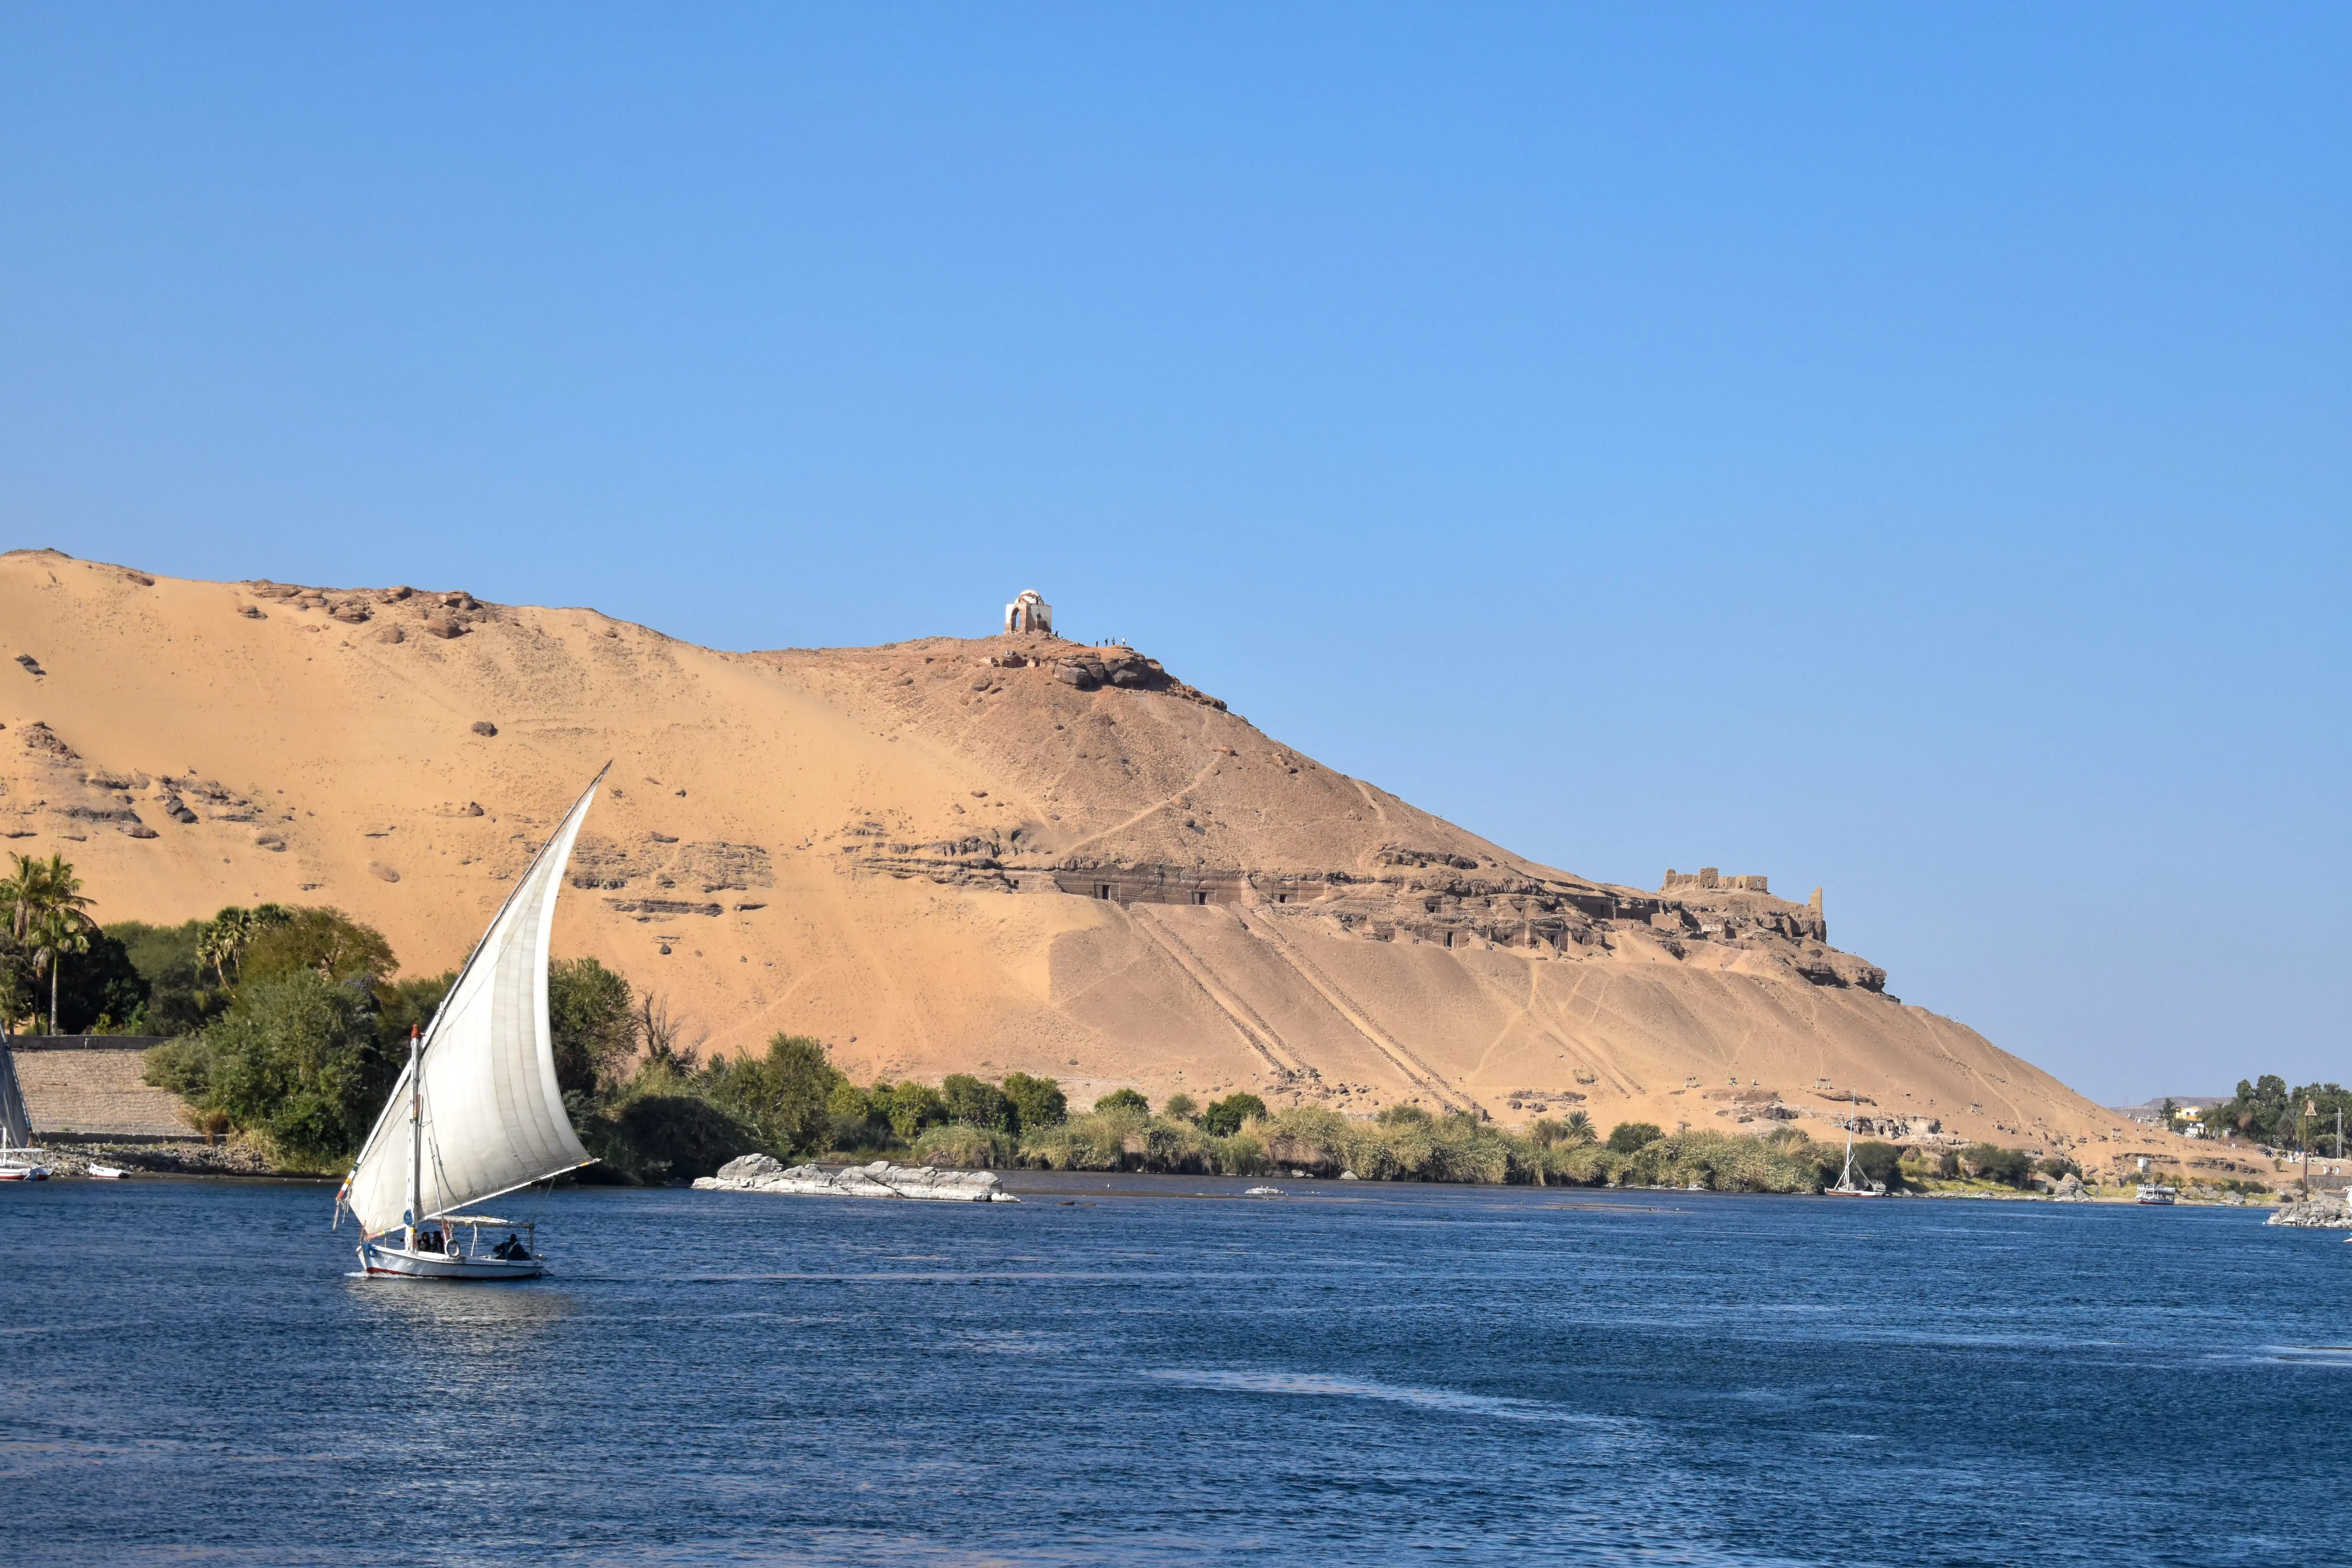 The Traditional Felucca of the Nile